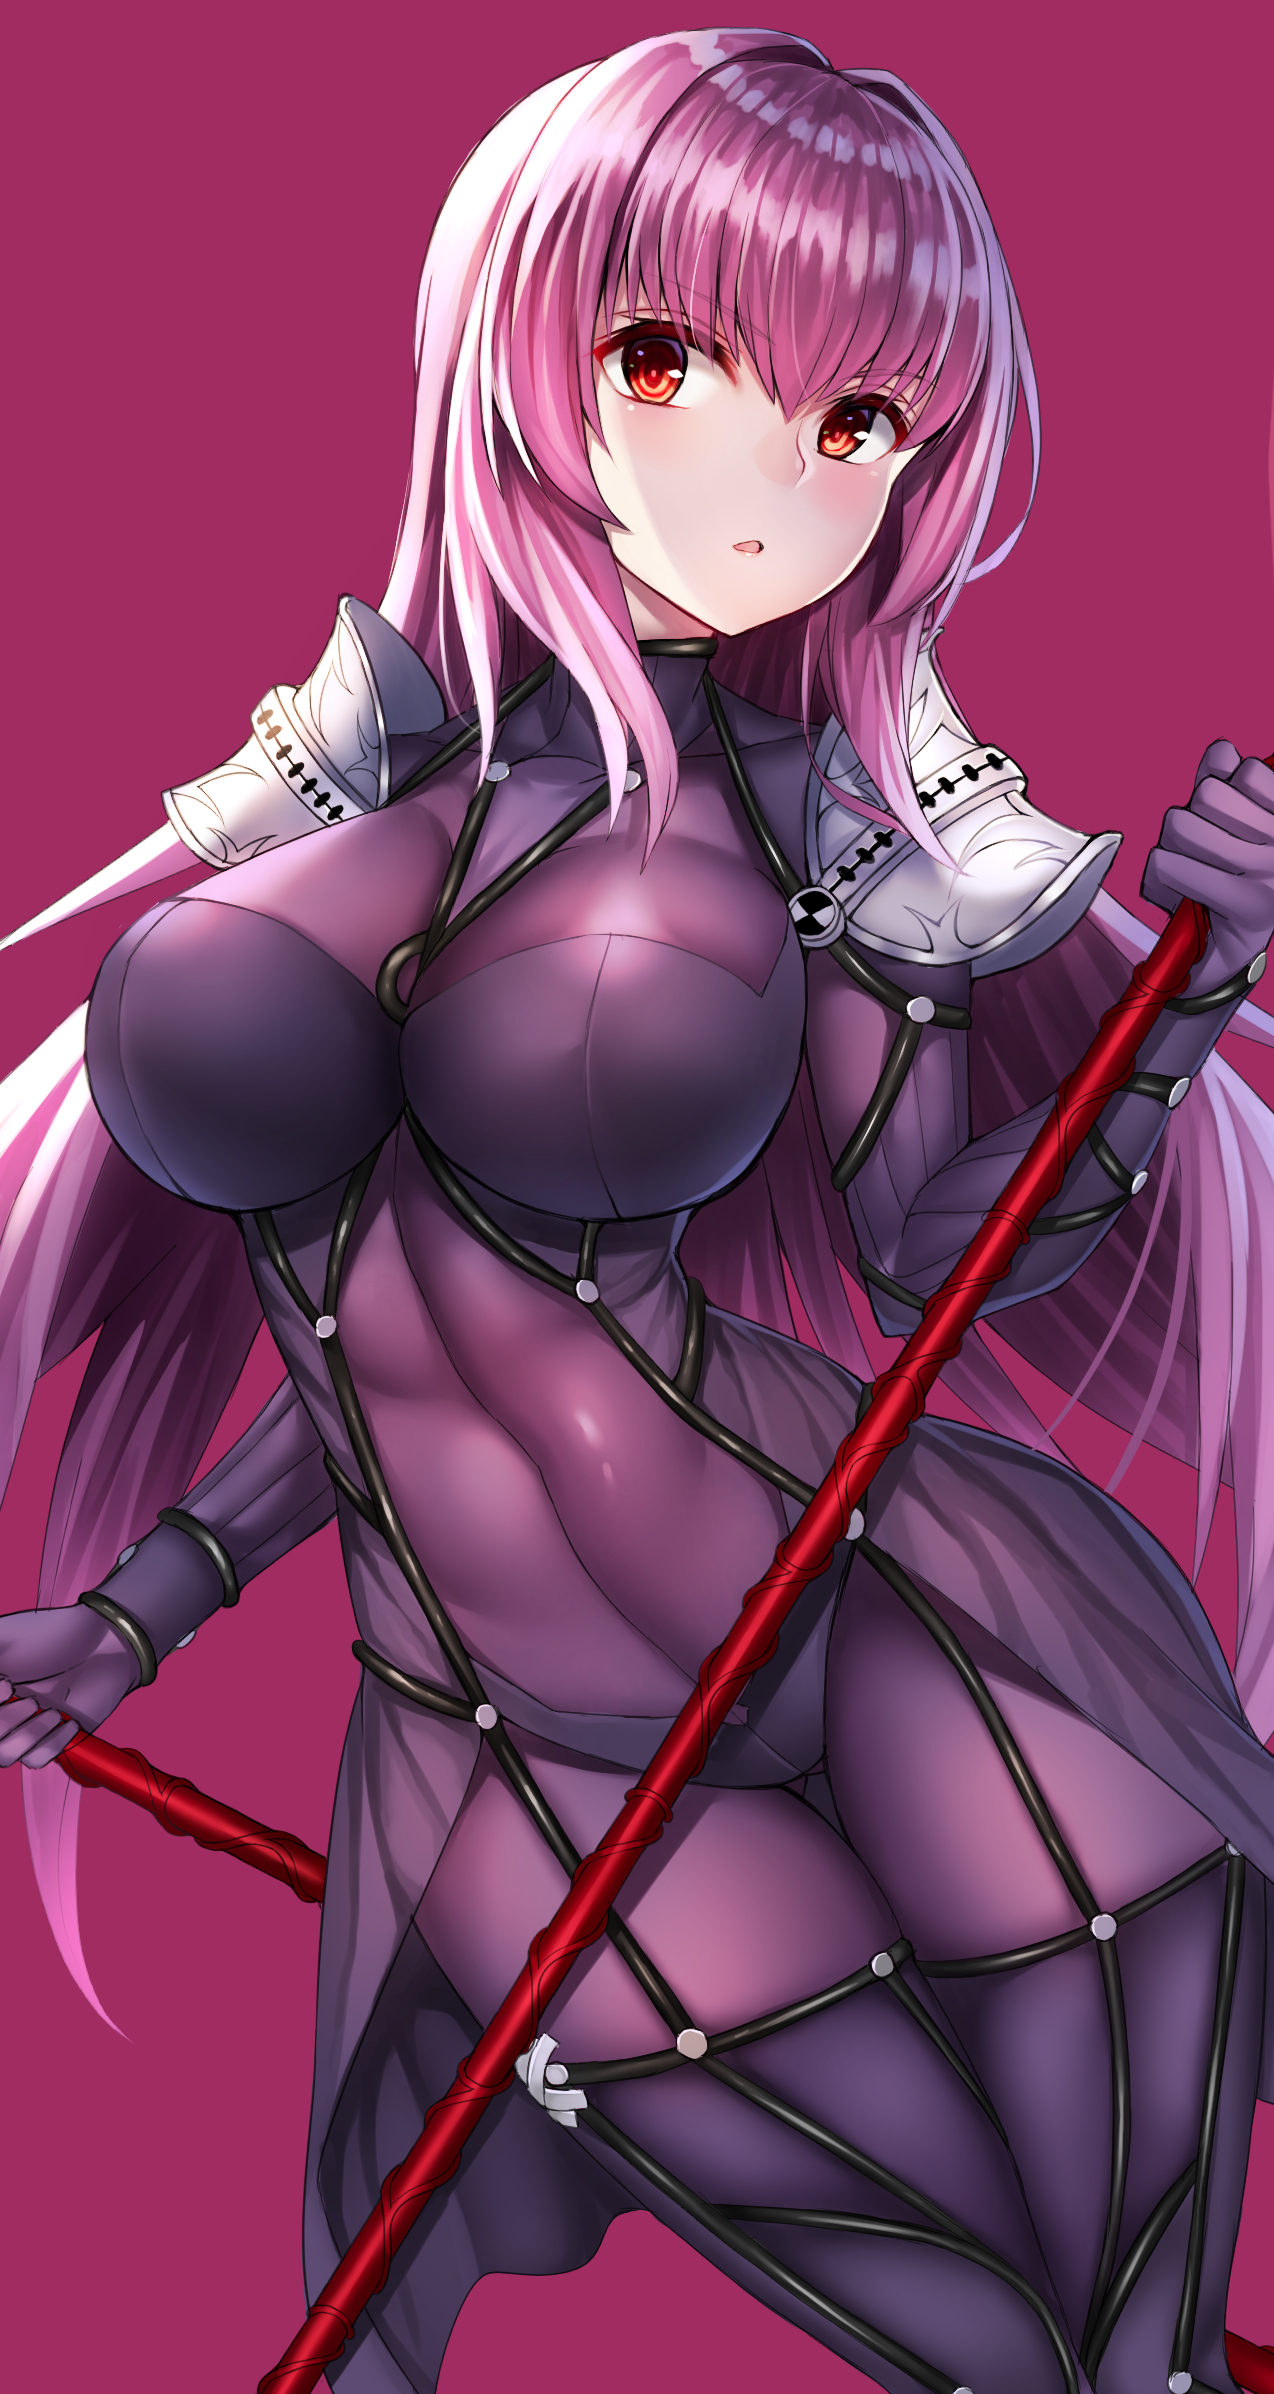 Anime 1274x2394 artwork Fate series Scathach anime girls Syoutamho bodysuit